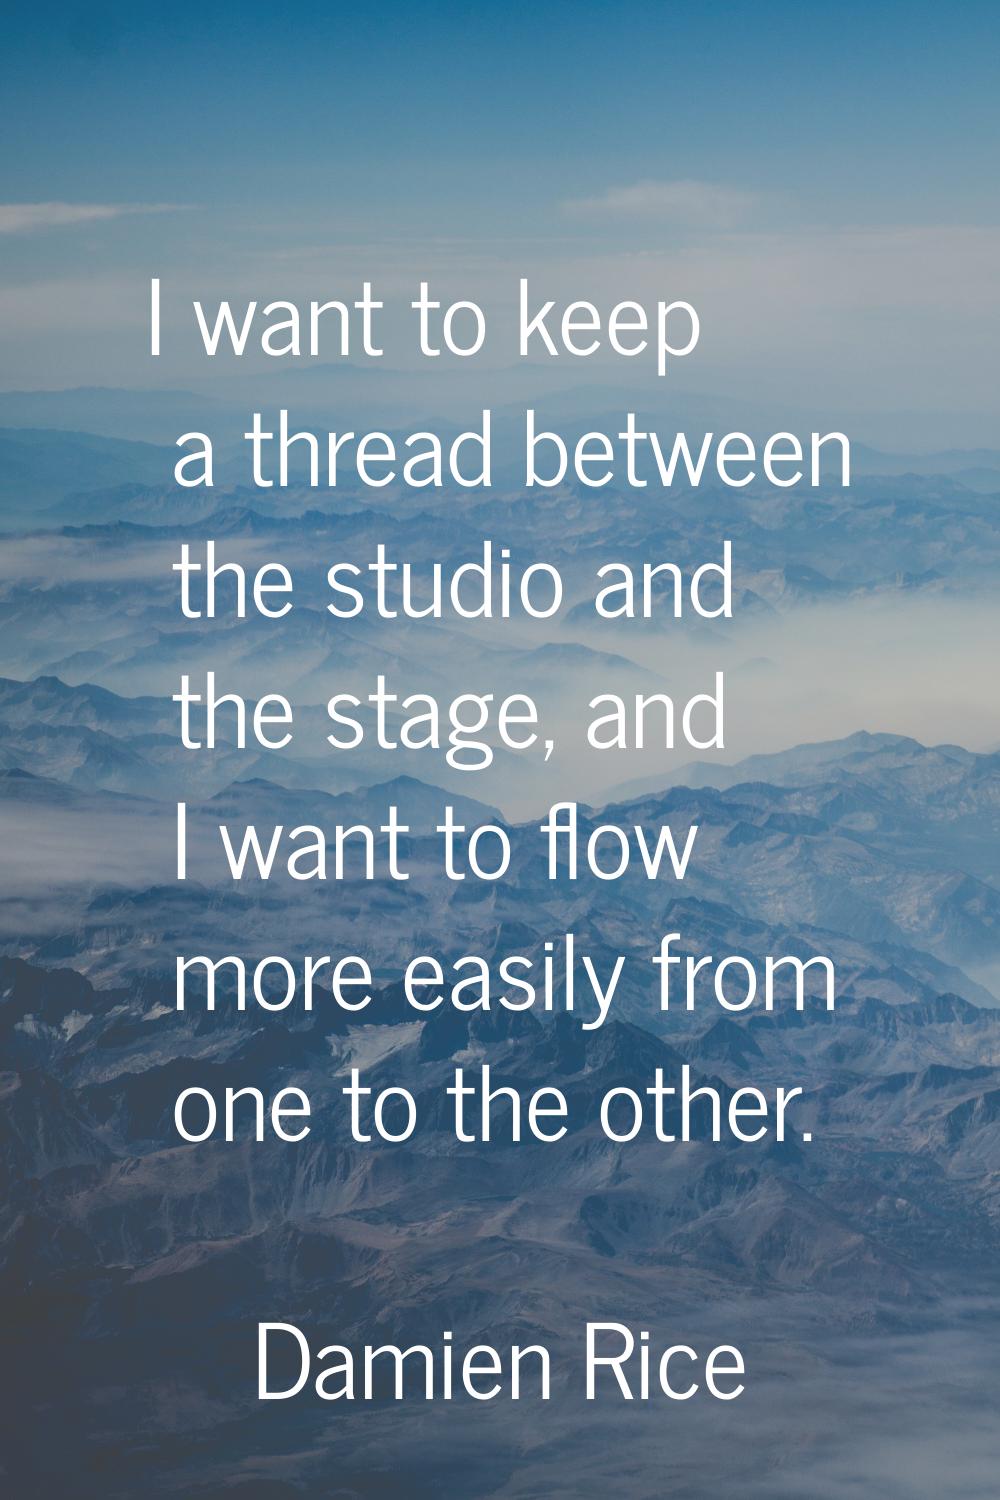 I want to keep a thread between the studio and the stage, and I want to flow more easily from one t